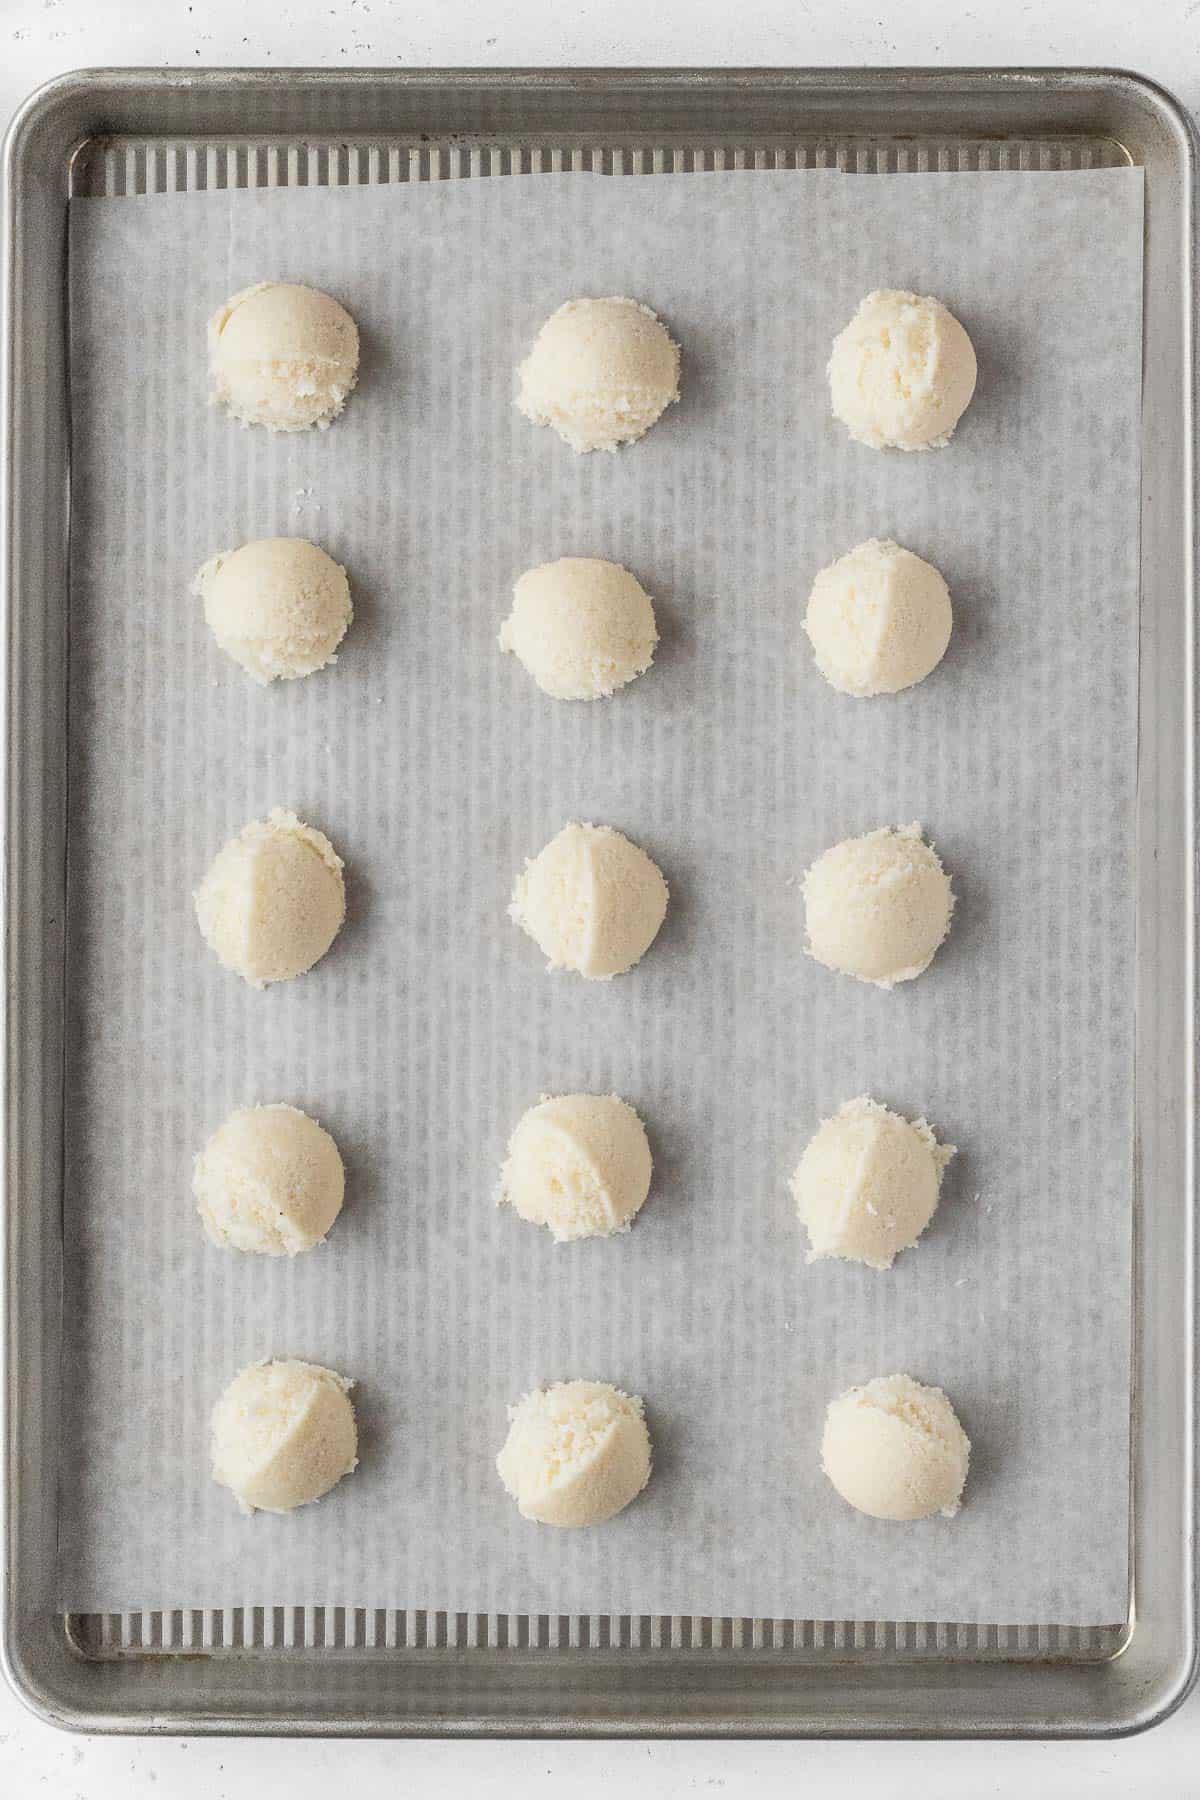 Vegan  macaroon dough on a parchment paper lined baking sheet.